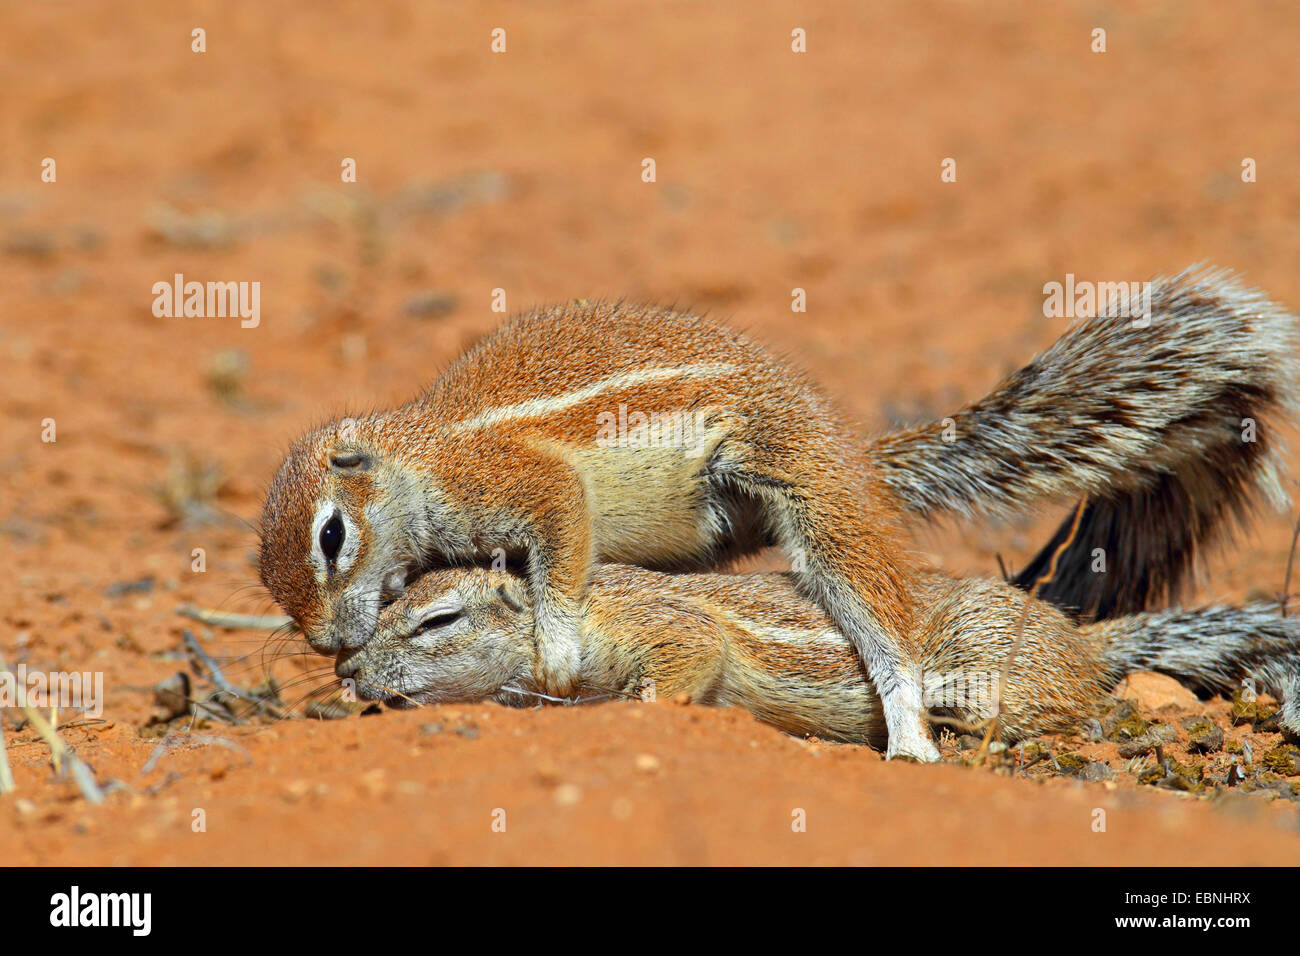 South African ground squirrel, Cape ground squirrel (Geosciurus inauris, Xerus inauris), female grooming a young squirrel, South Africa, Kgalagadi Transfrontier National Park Stock Photo